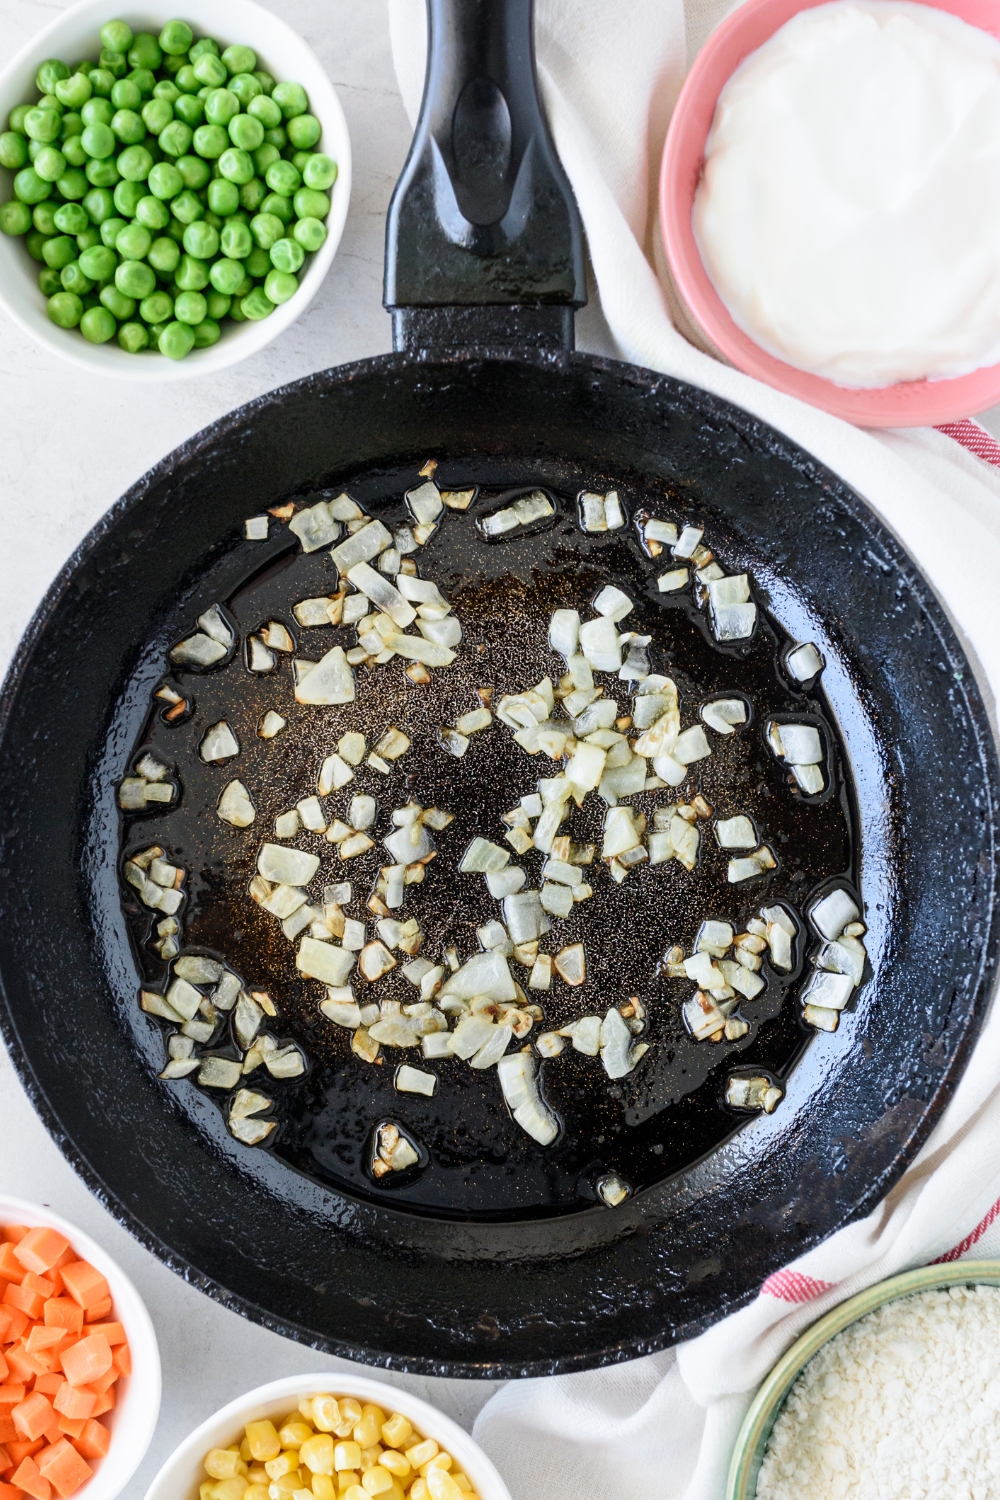 A black skillet with diced onion cooking in oil. The skillet is surrounded by an assortment of ingredients.